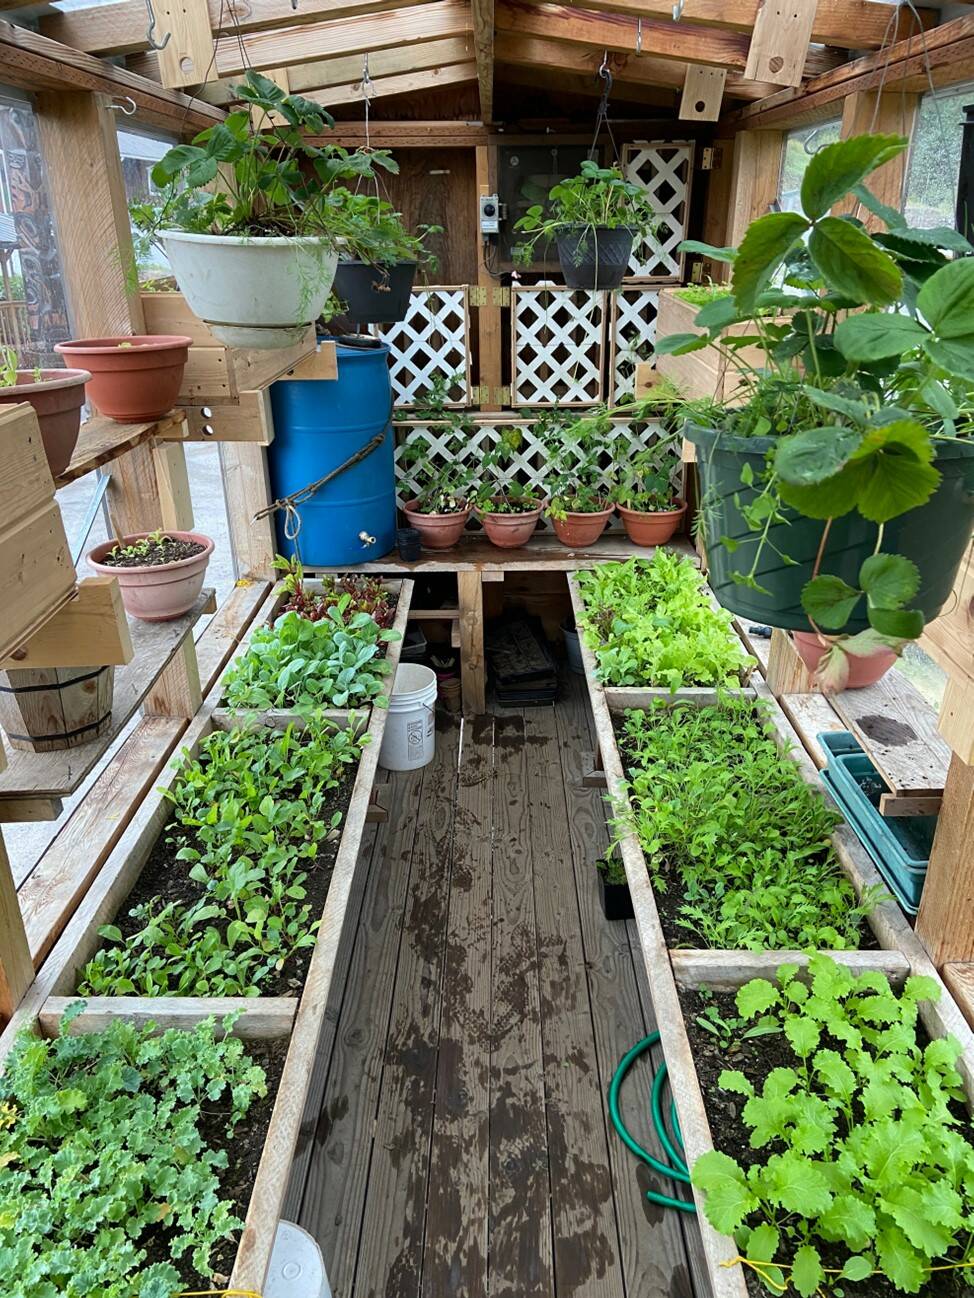 Moby the Mobile Greenhouse filled with baby vegetables planted by Mark Browning’s students in 2021. (Courtesy Photo / Mark Browning)